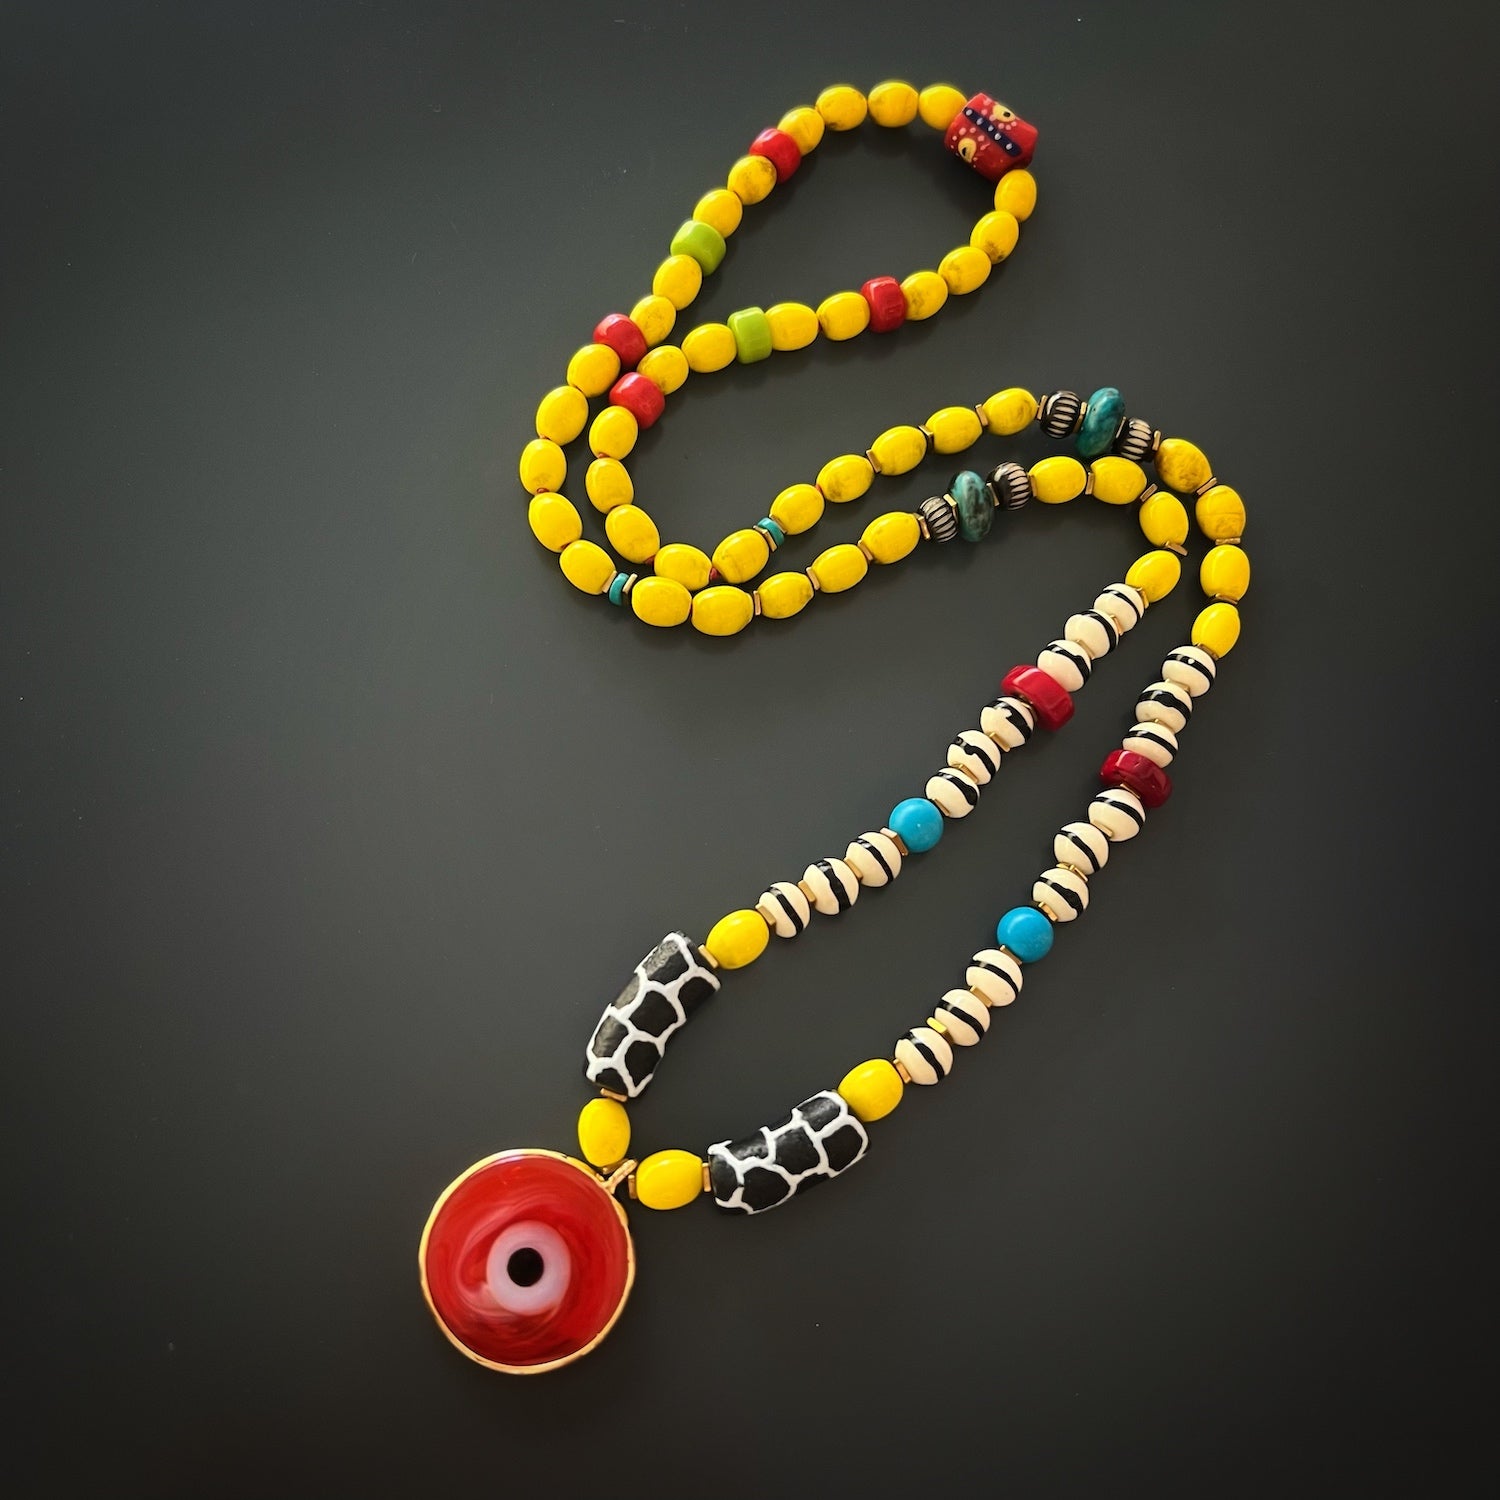 Necklace length of 34&quot; on the African Yellow Happiness Necklace, providing a versatile and stylish accessory.